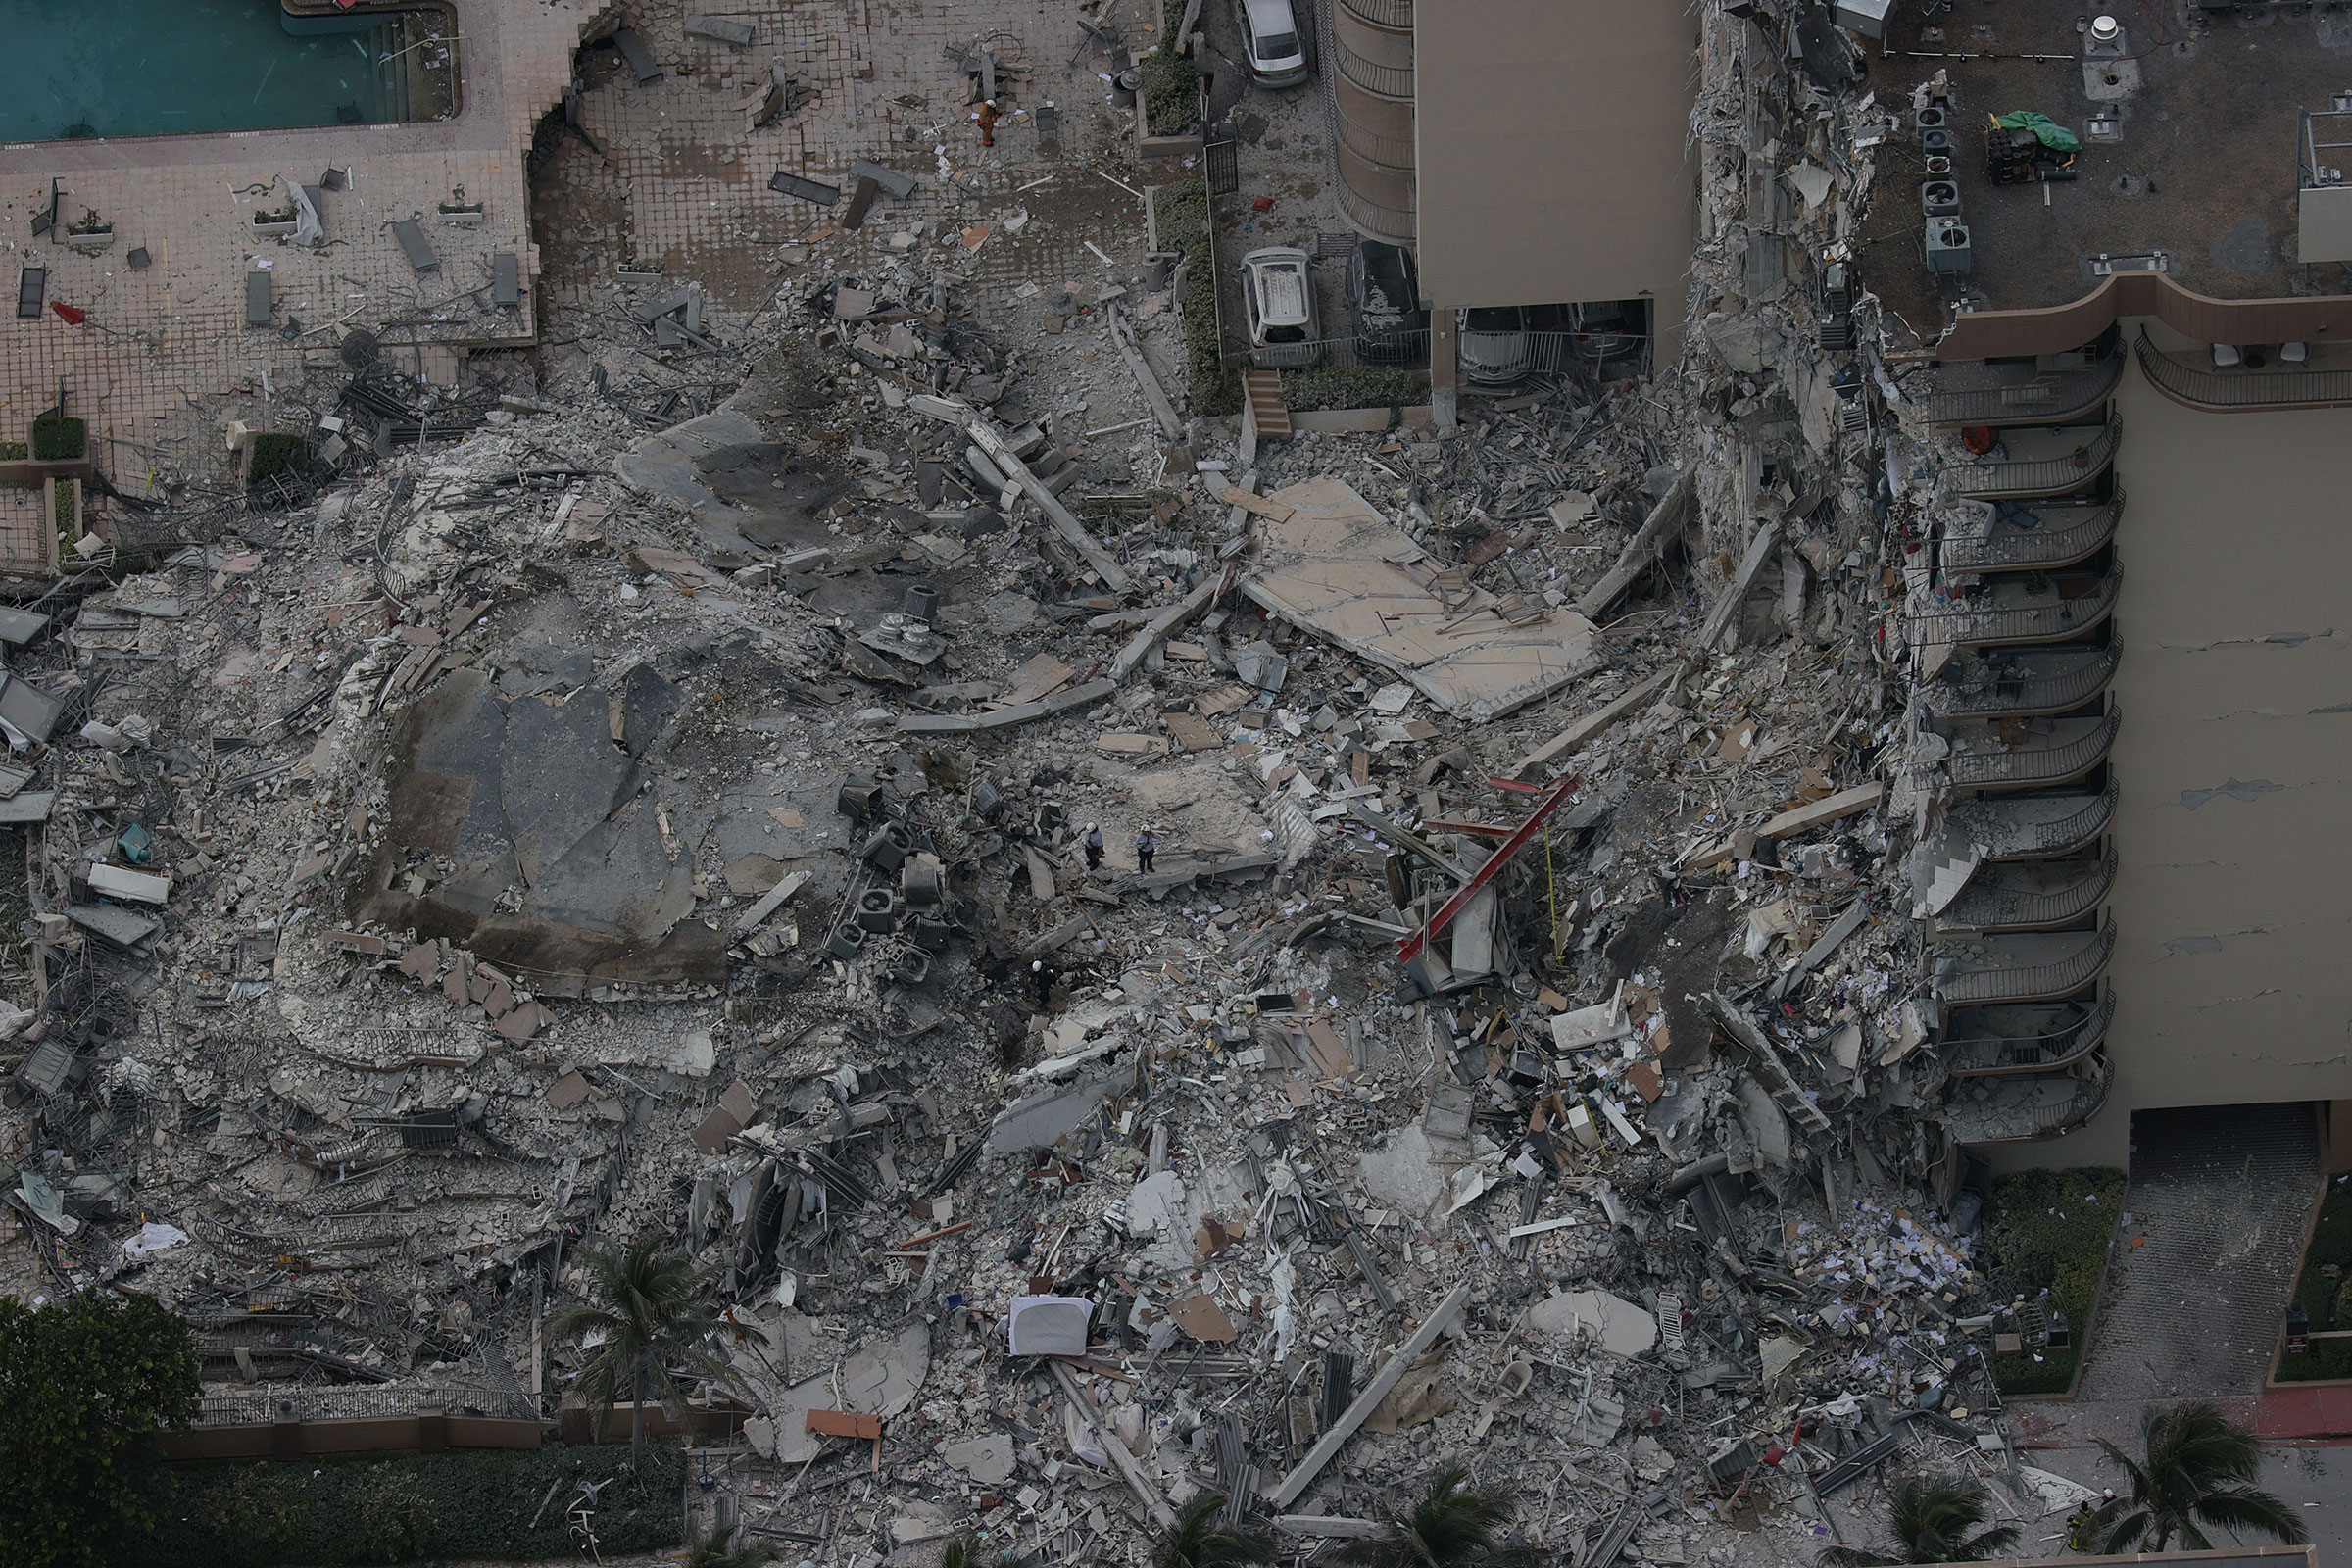 Search and rescue personnel work in the rubble of the 12-story condo tower that crumbled to the ground in Surfside on June 24, 2021. (Joe Raedle—Getty Images)